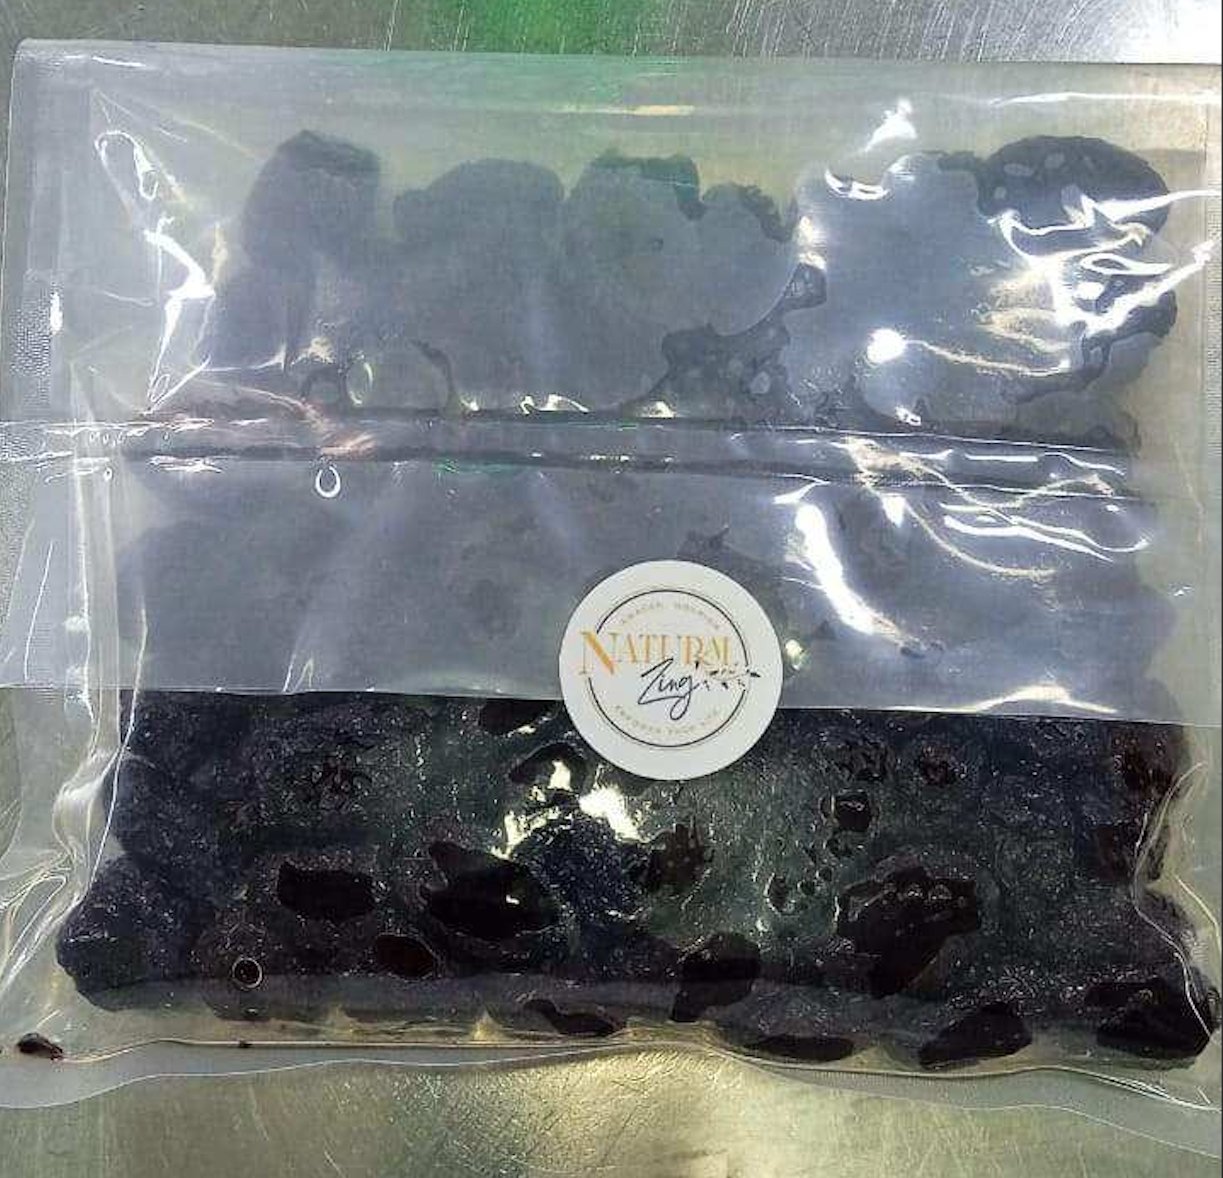 Peruvian Black Dried Olives (Herbed, Pitted) 5 oz